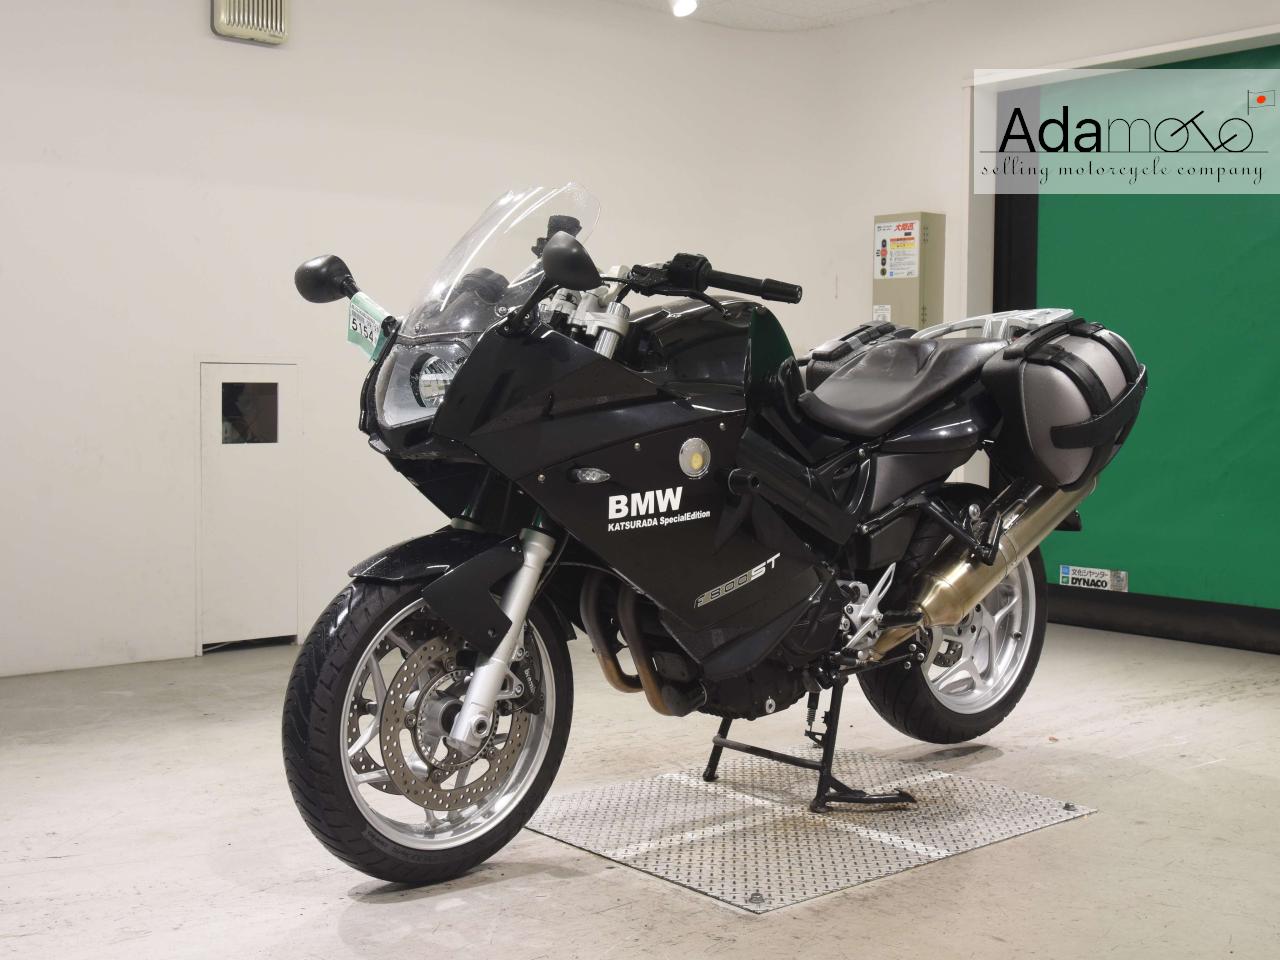 BMW F800ST - Adamoto - Motorcycles from Japan